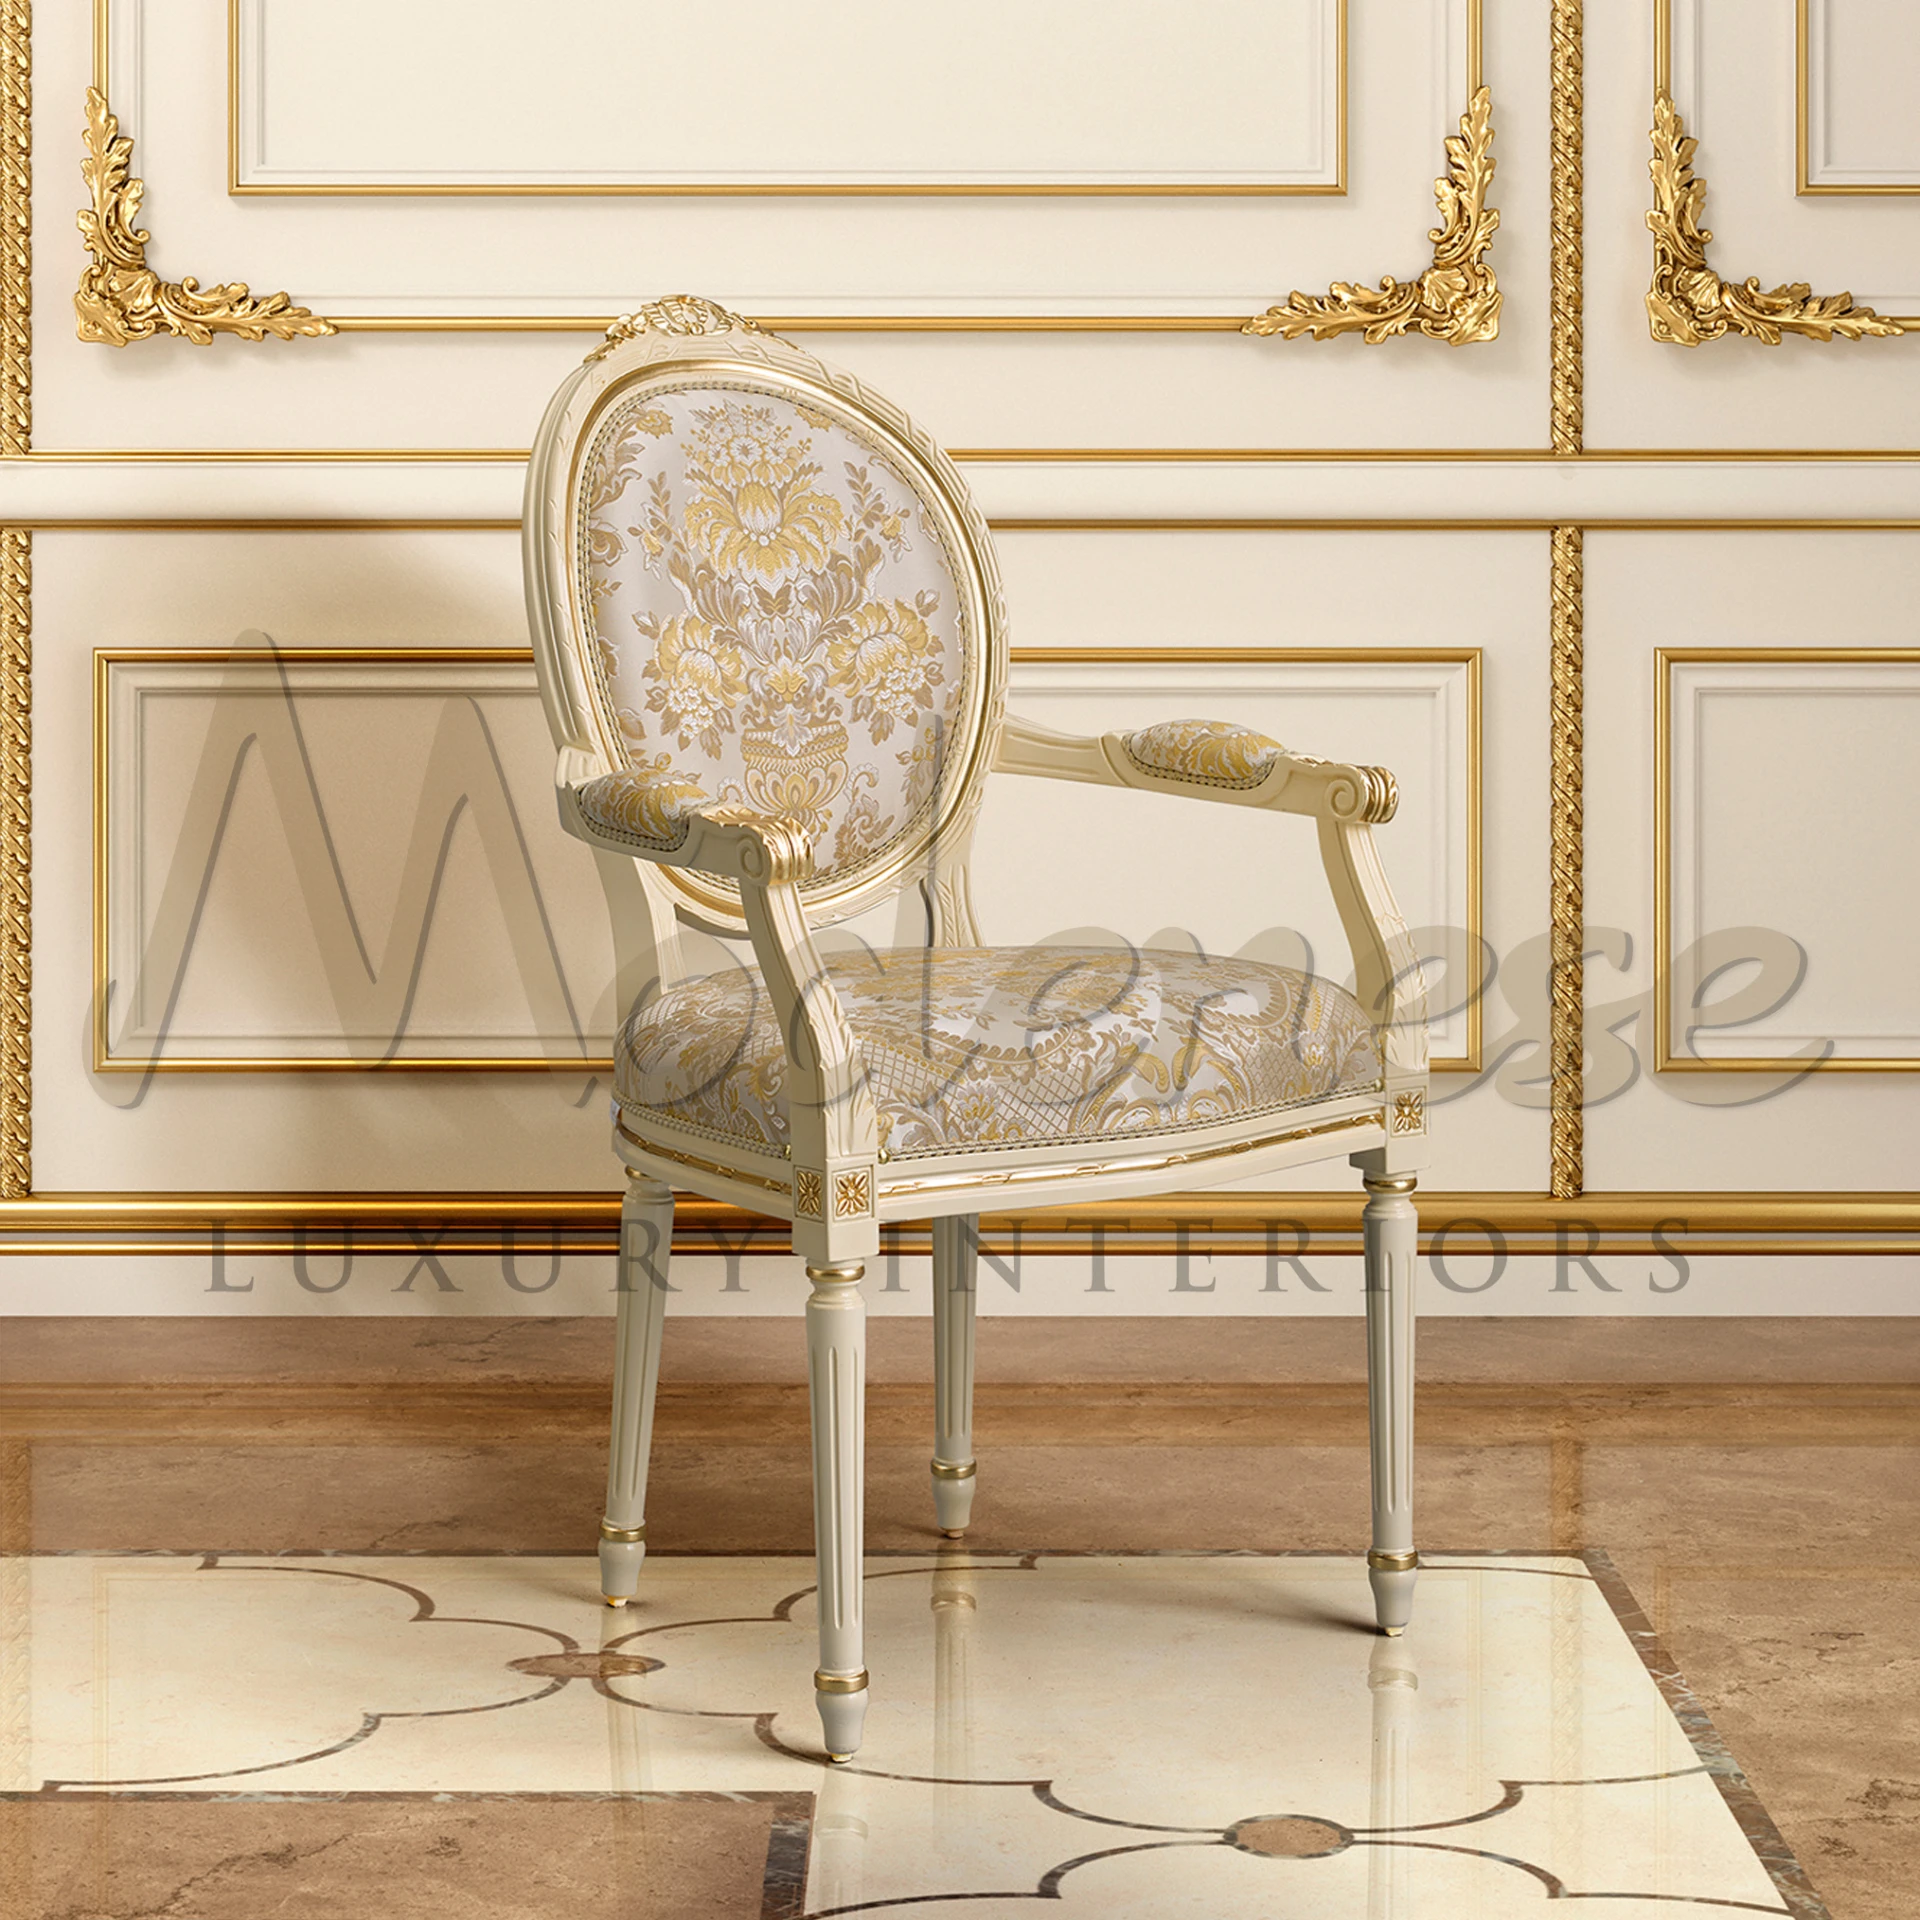 Luxurious chair with floral designs in an elegant golden color room.